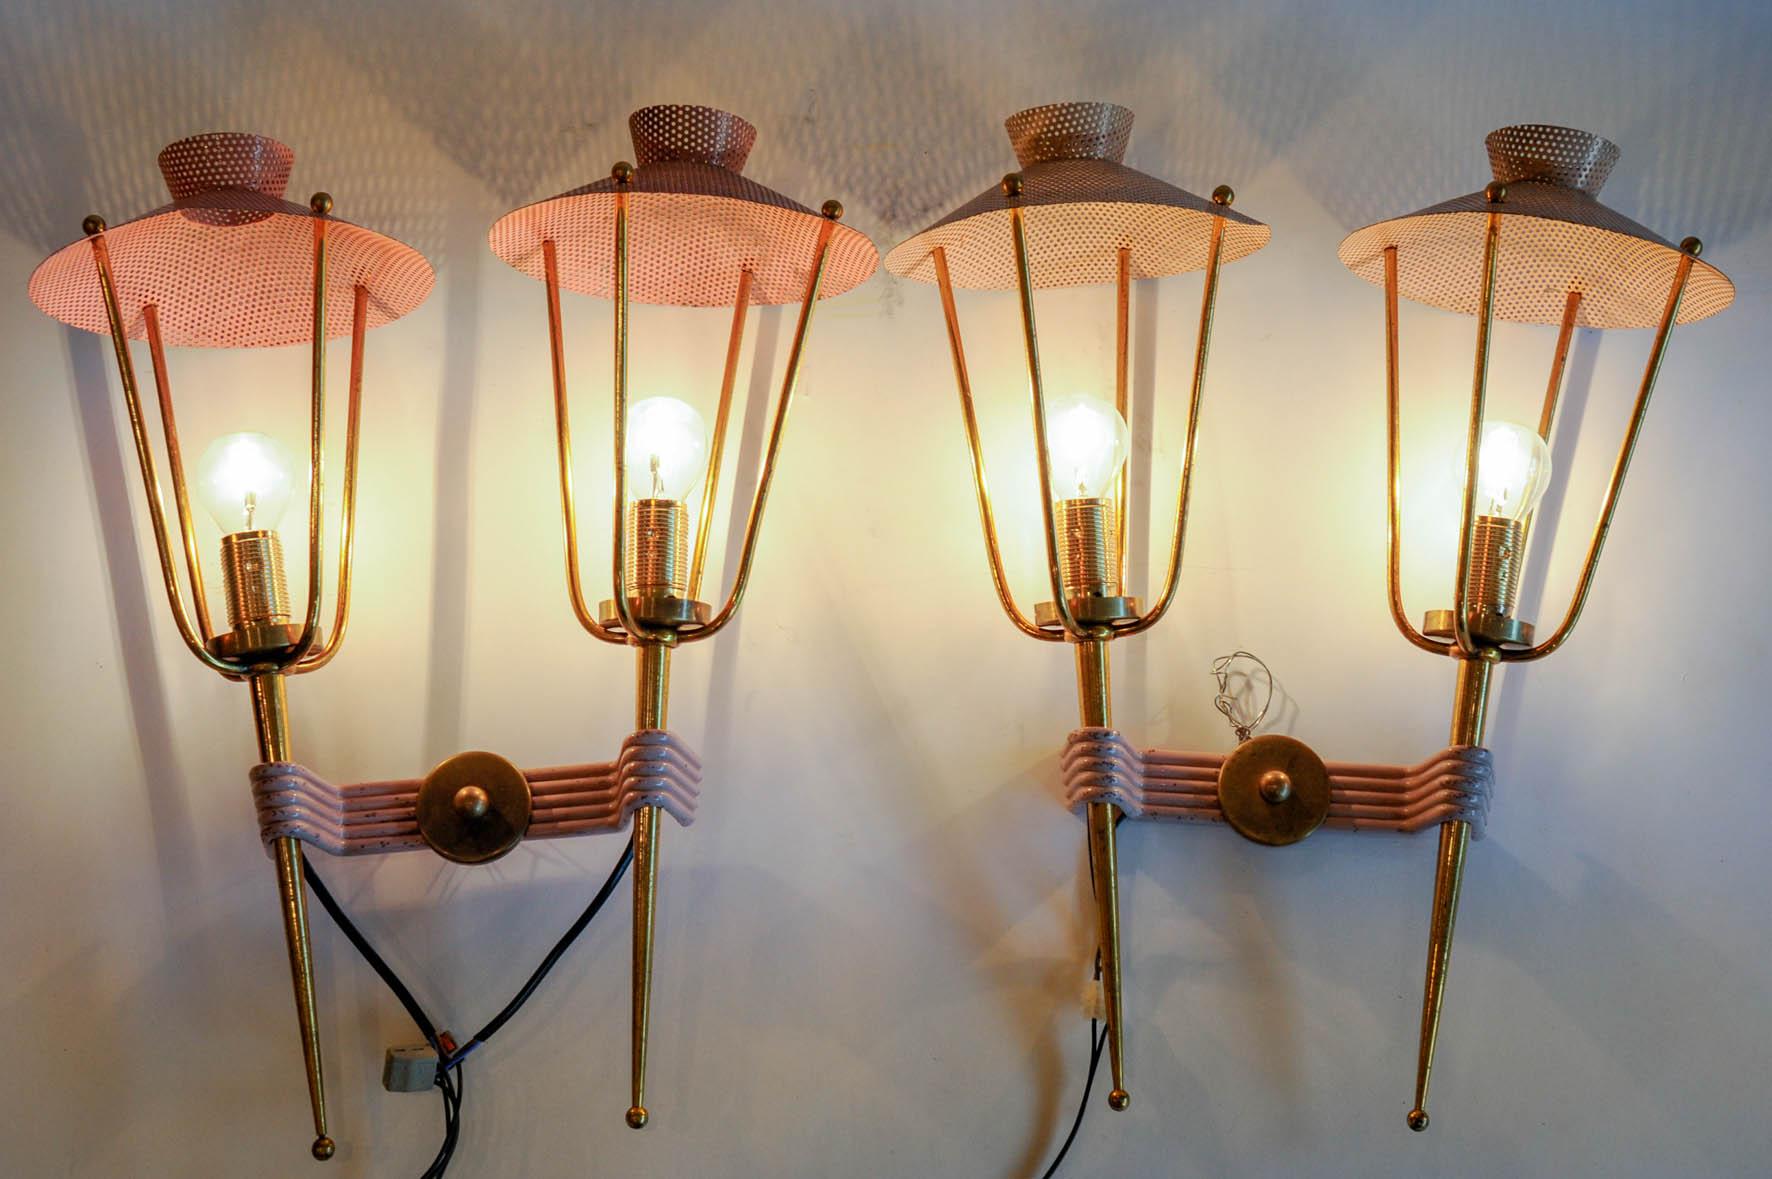 This pair of pink vintage mural lights is restored with brand new electrical materiel. Made of brass and painted metal, two-light by sconce.